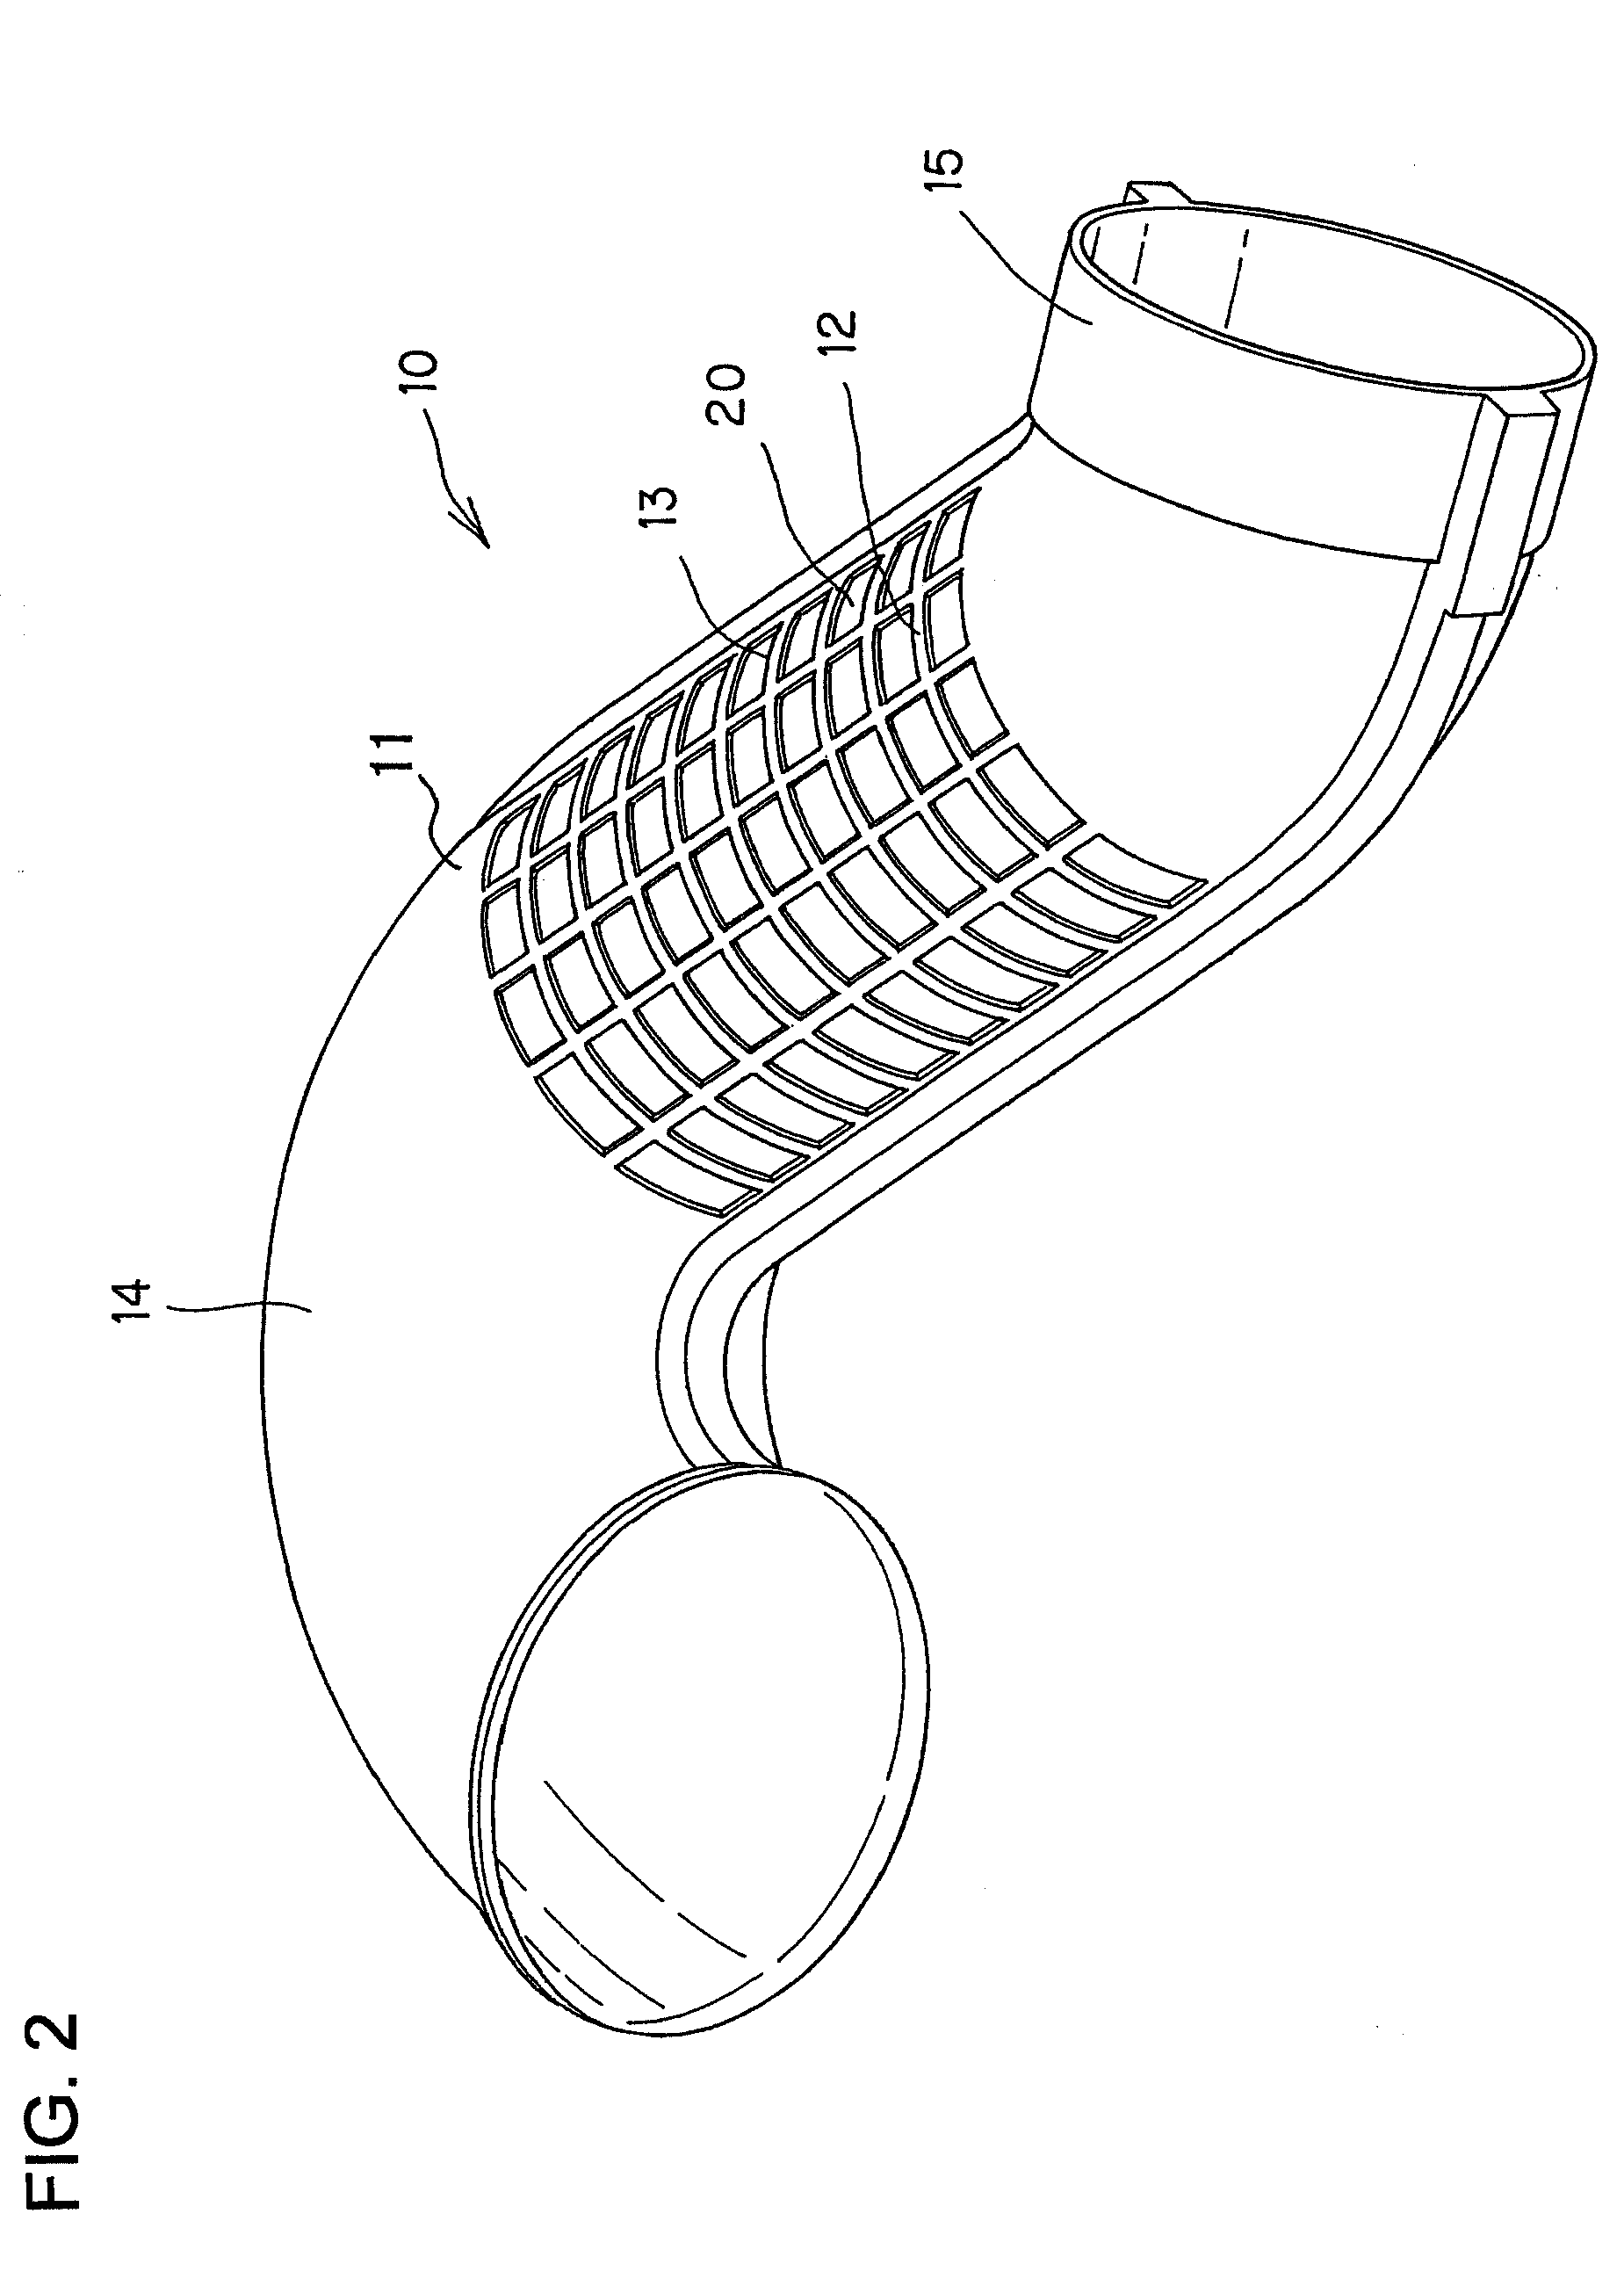 Intake duct